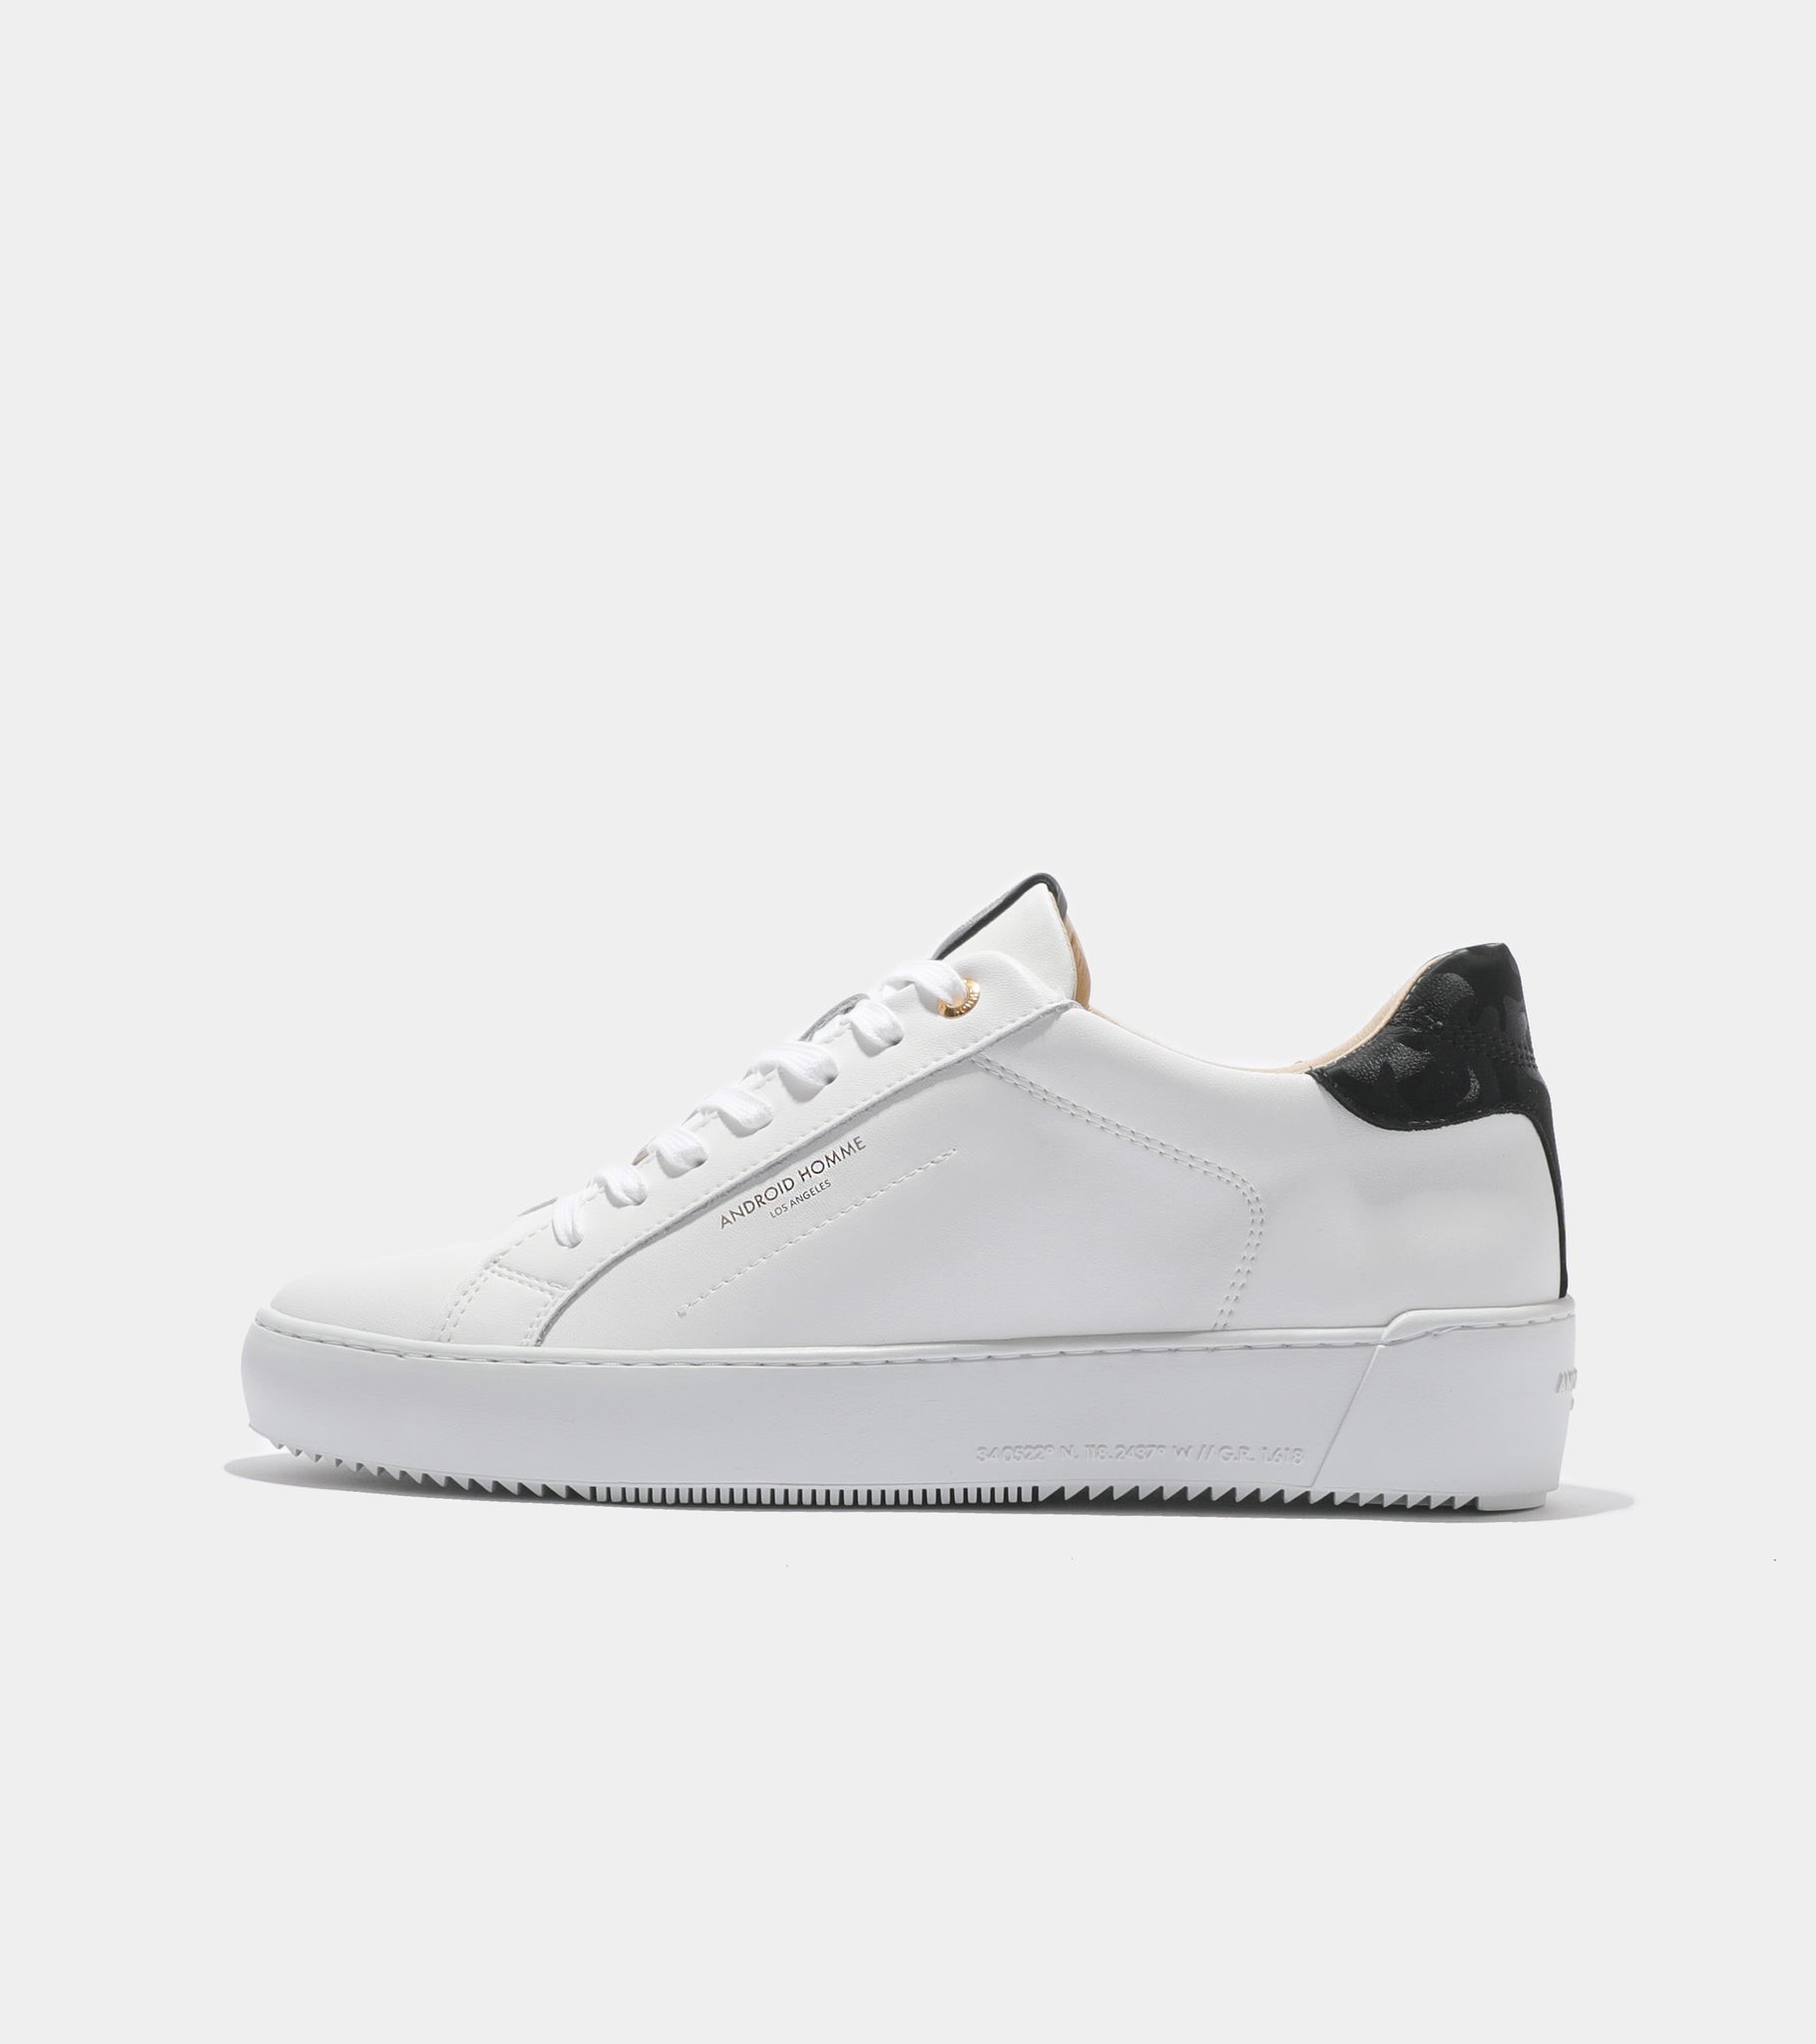 Ecom imagery of the Zuma White Black Leather Camo Android Homme Trainers.